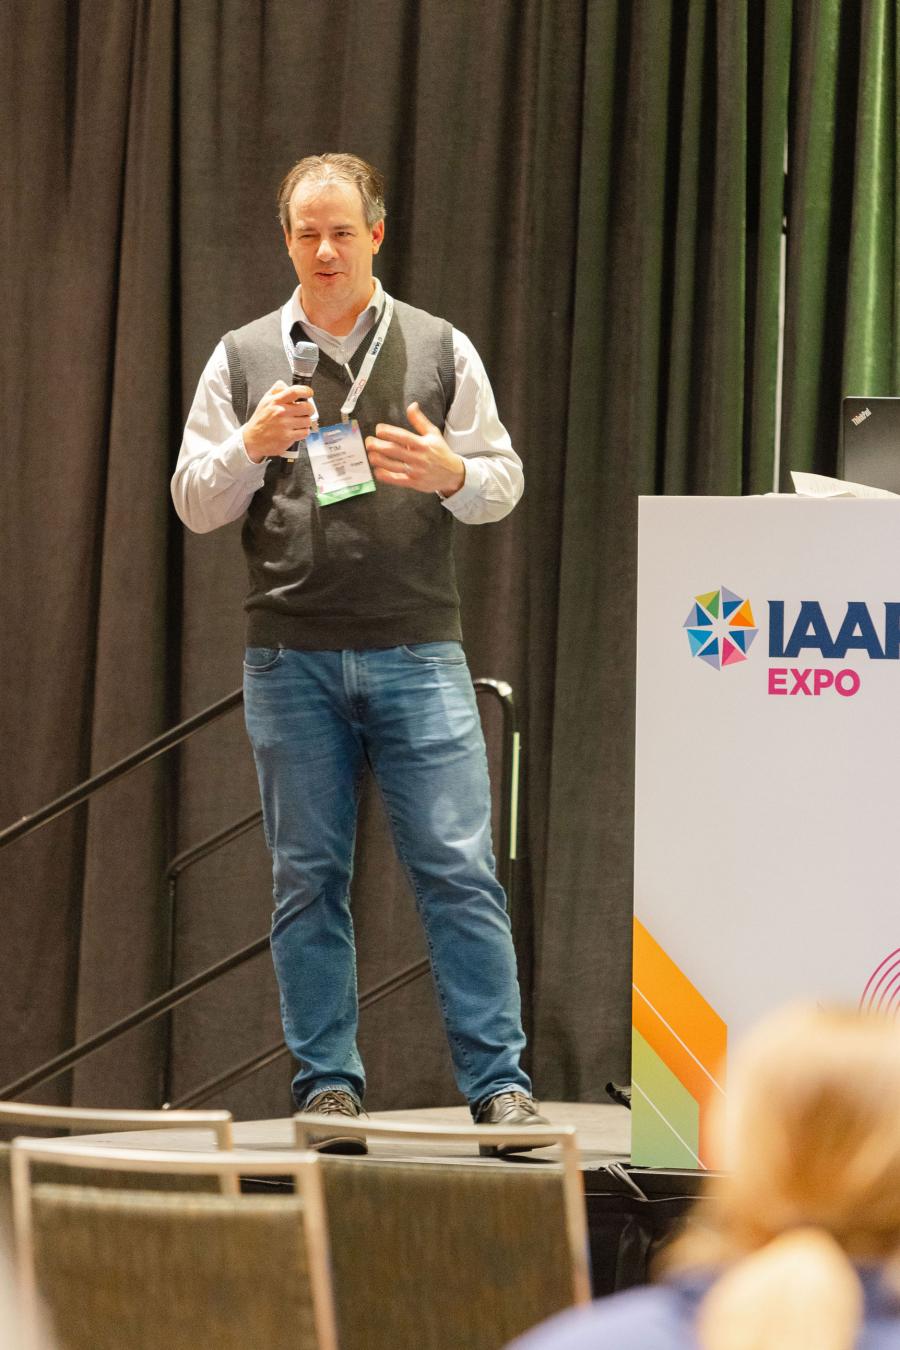 Tim Benson, chief operating officer at Fremont Family YMCA, stands next to a podium with microphone in hand, delivering his presentation during Breaking Down the Silos 2.0 EDUSession at IAAPA Expo 2023